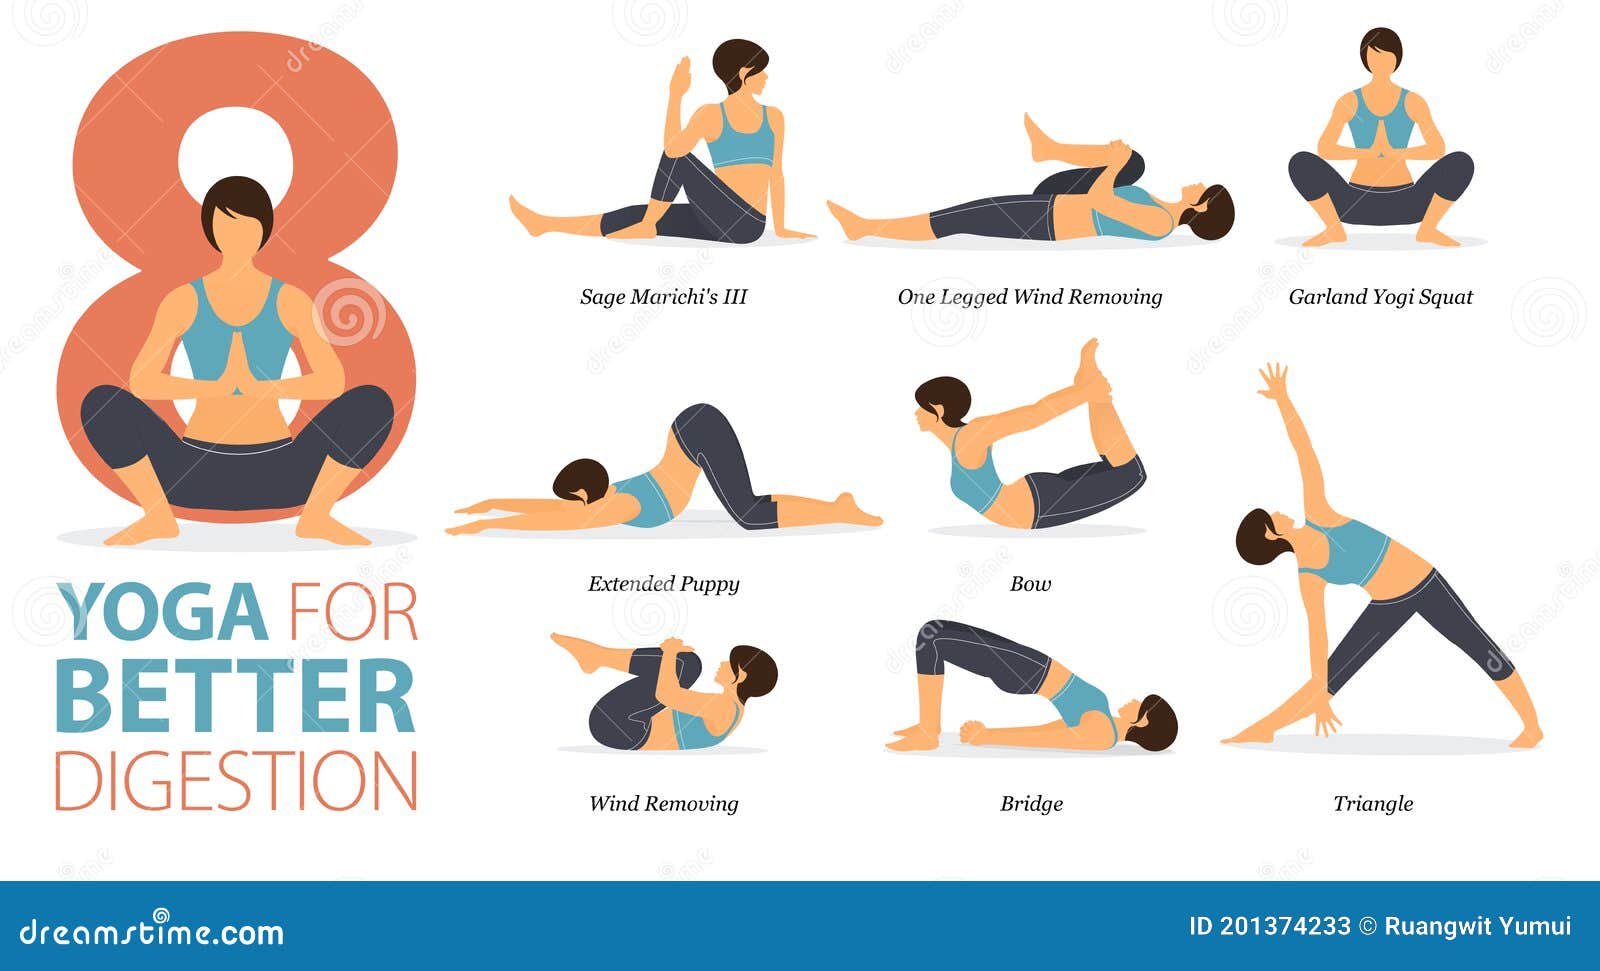 9 Yoga Poses For Healthy Digestion | Maji Sports